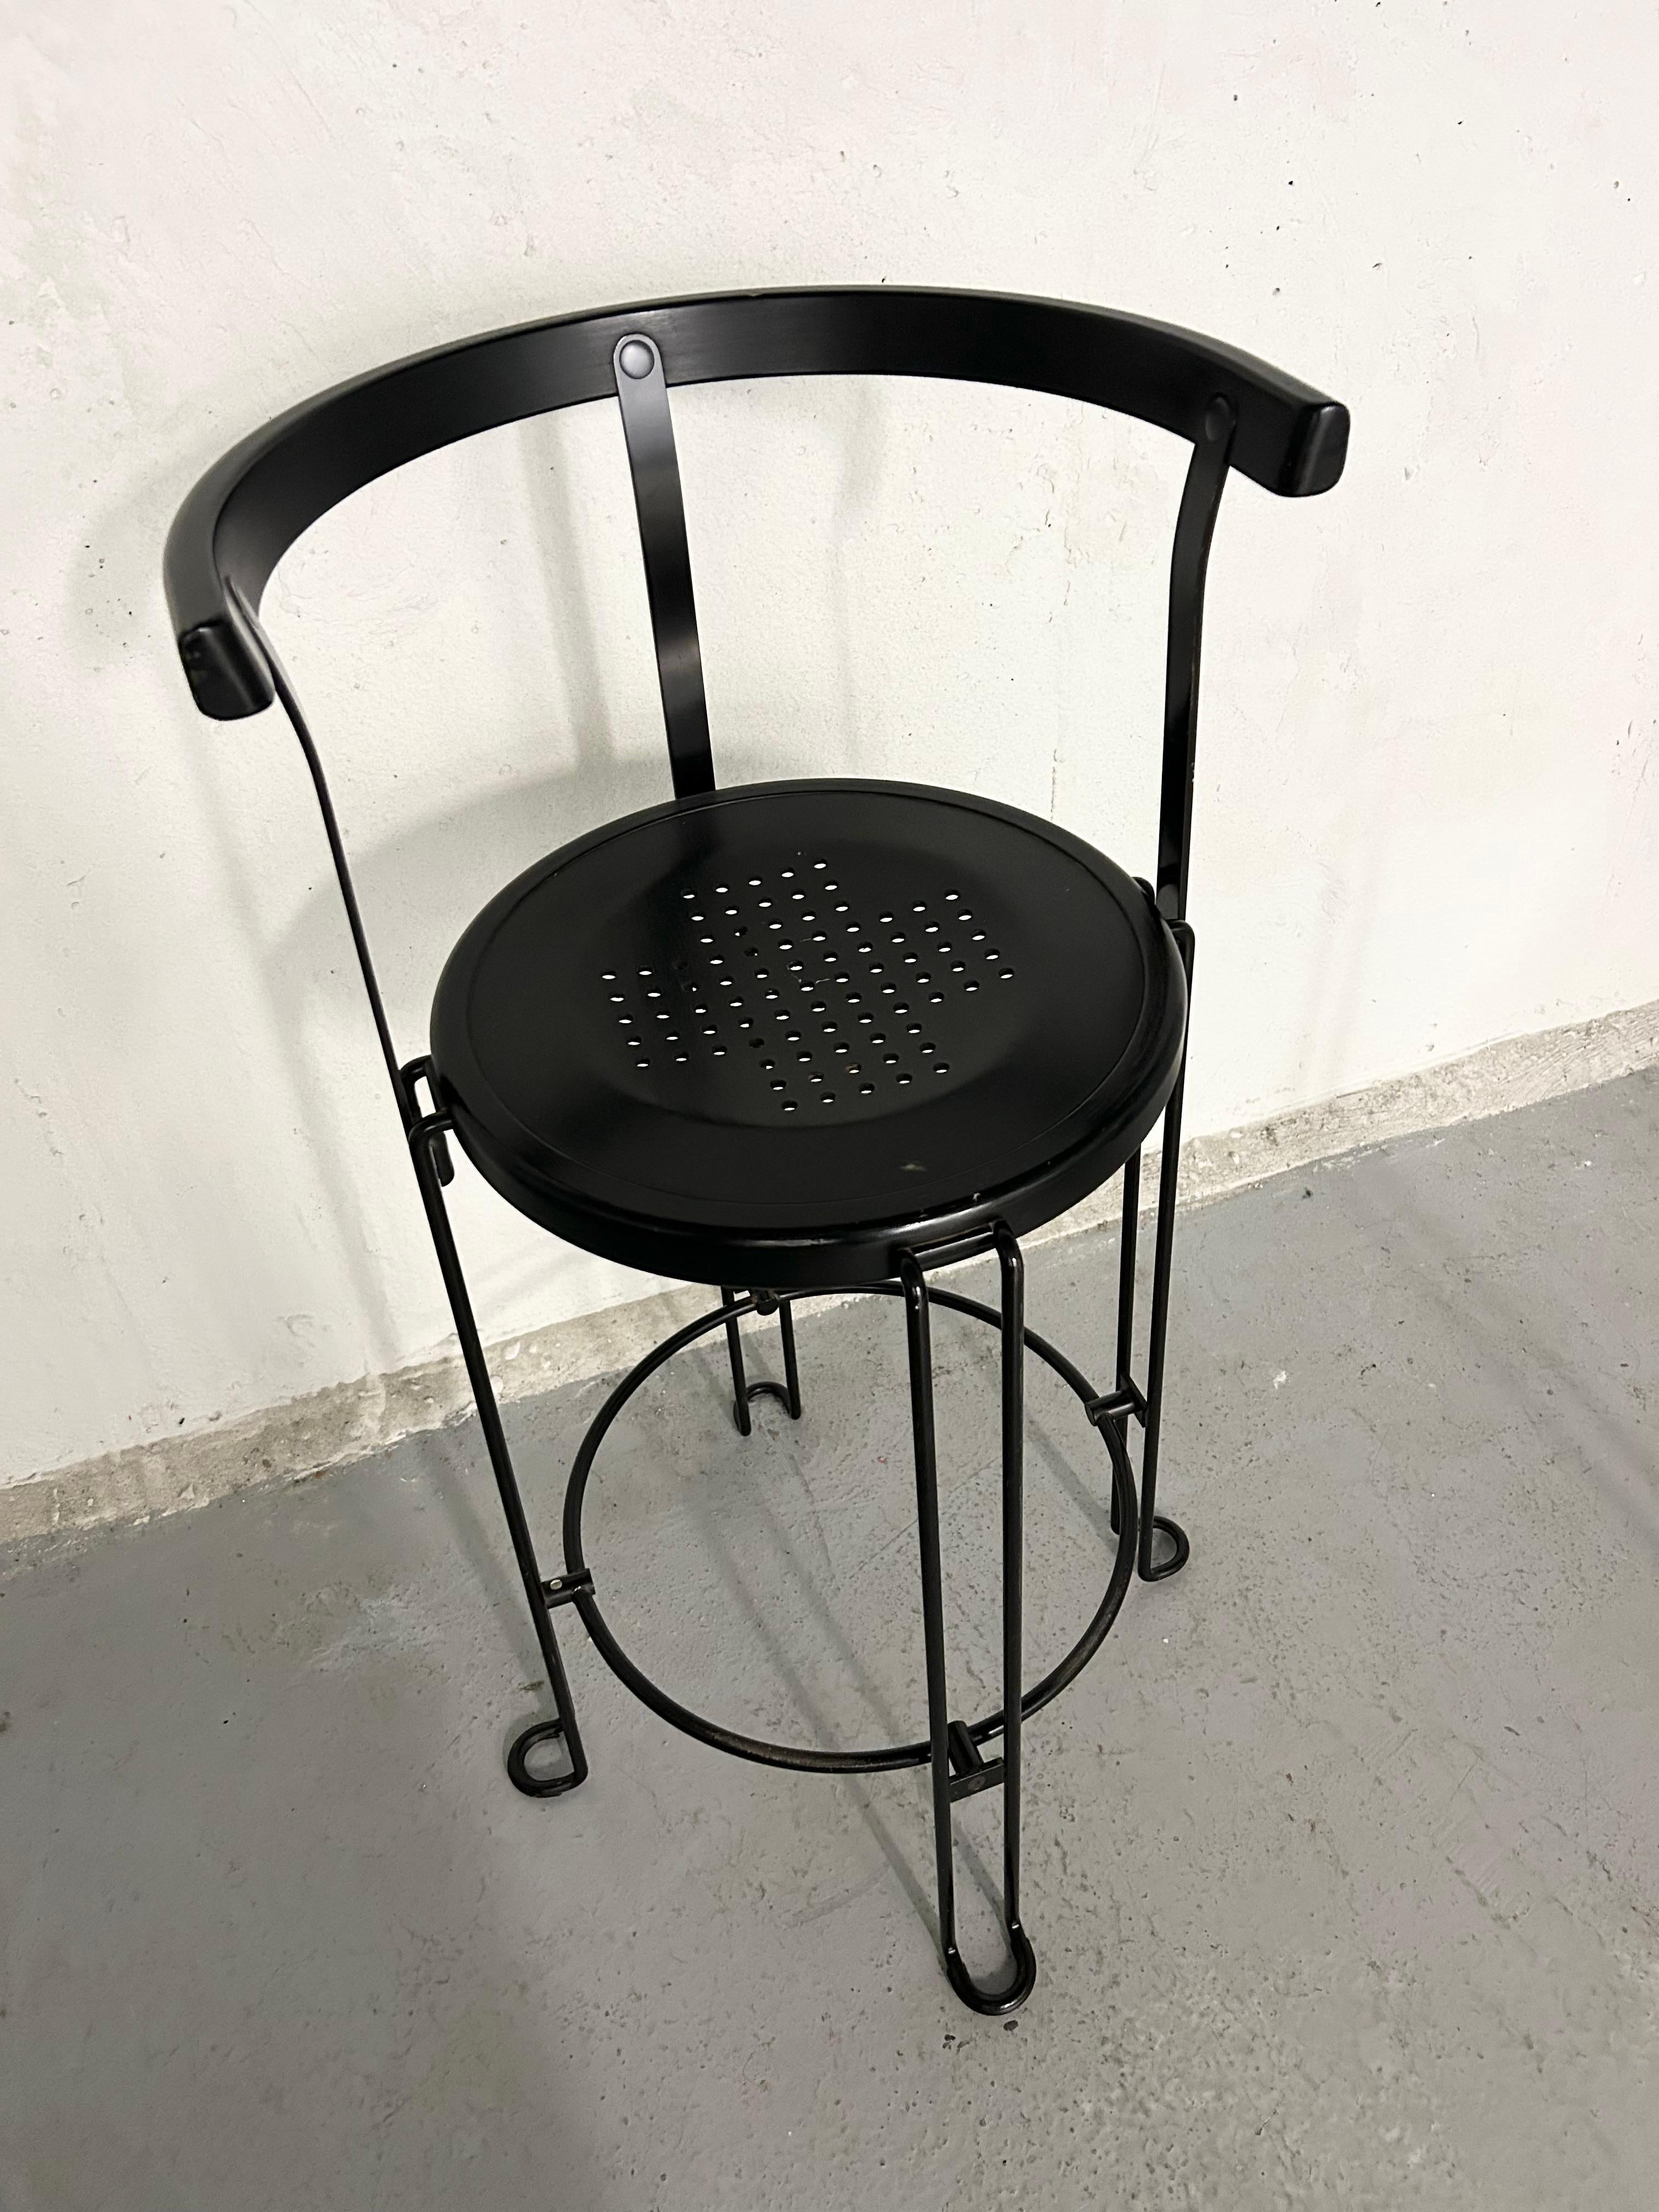 Steel Borge Lindau for Bla Station Sweden, 1986 B4-65 Counter Height Stool